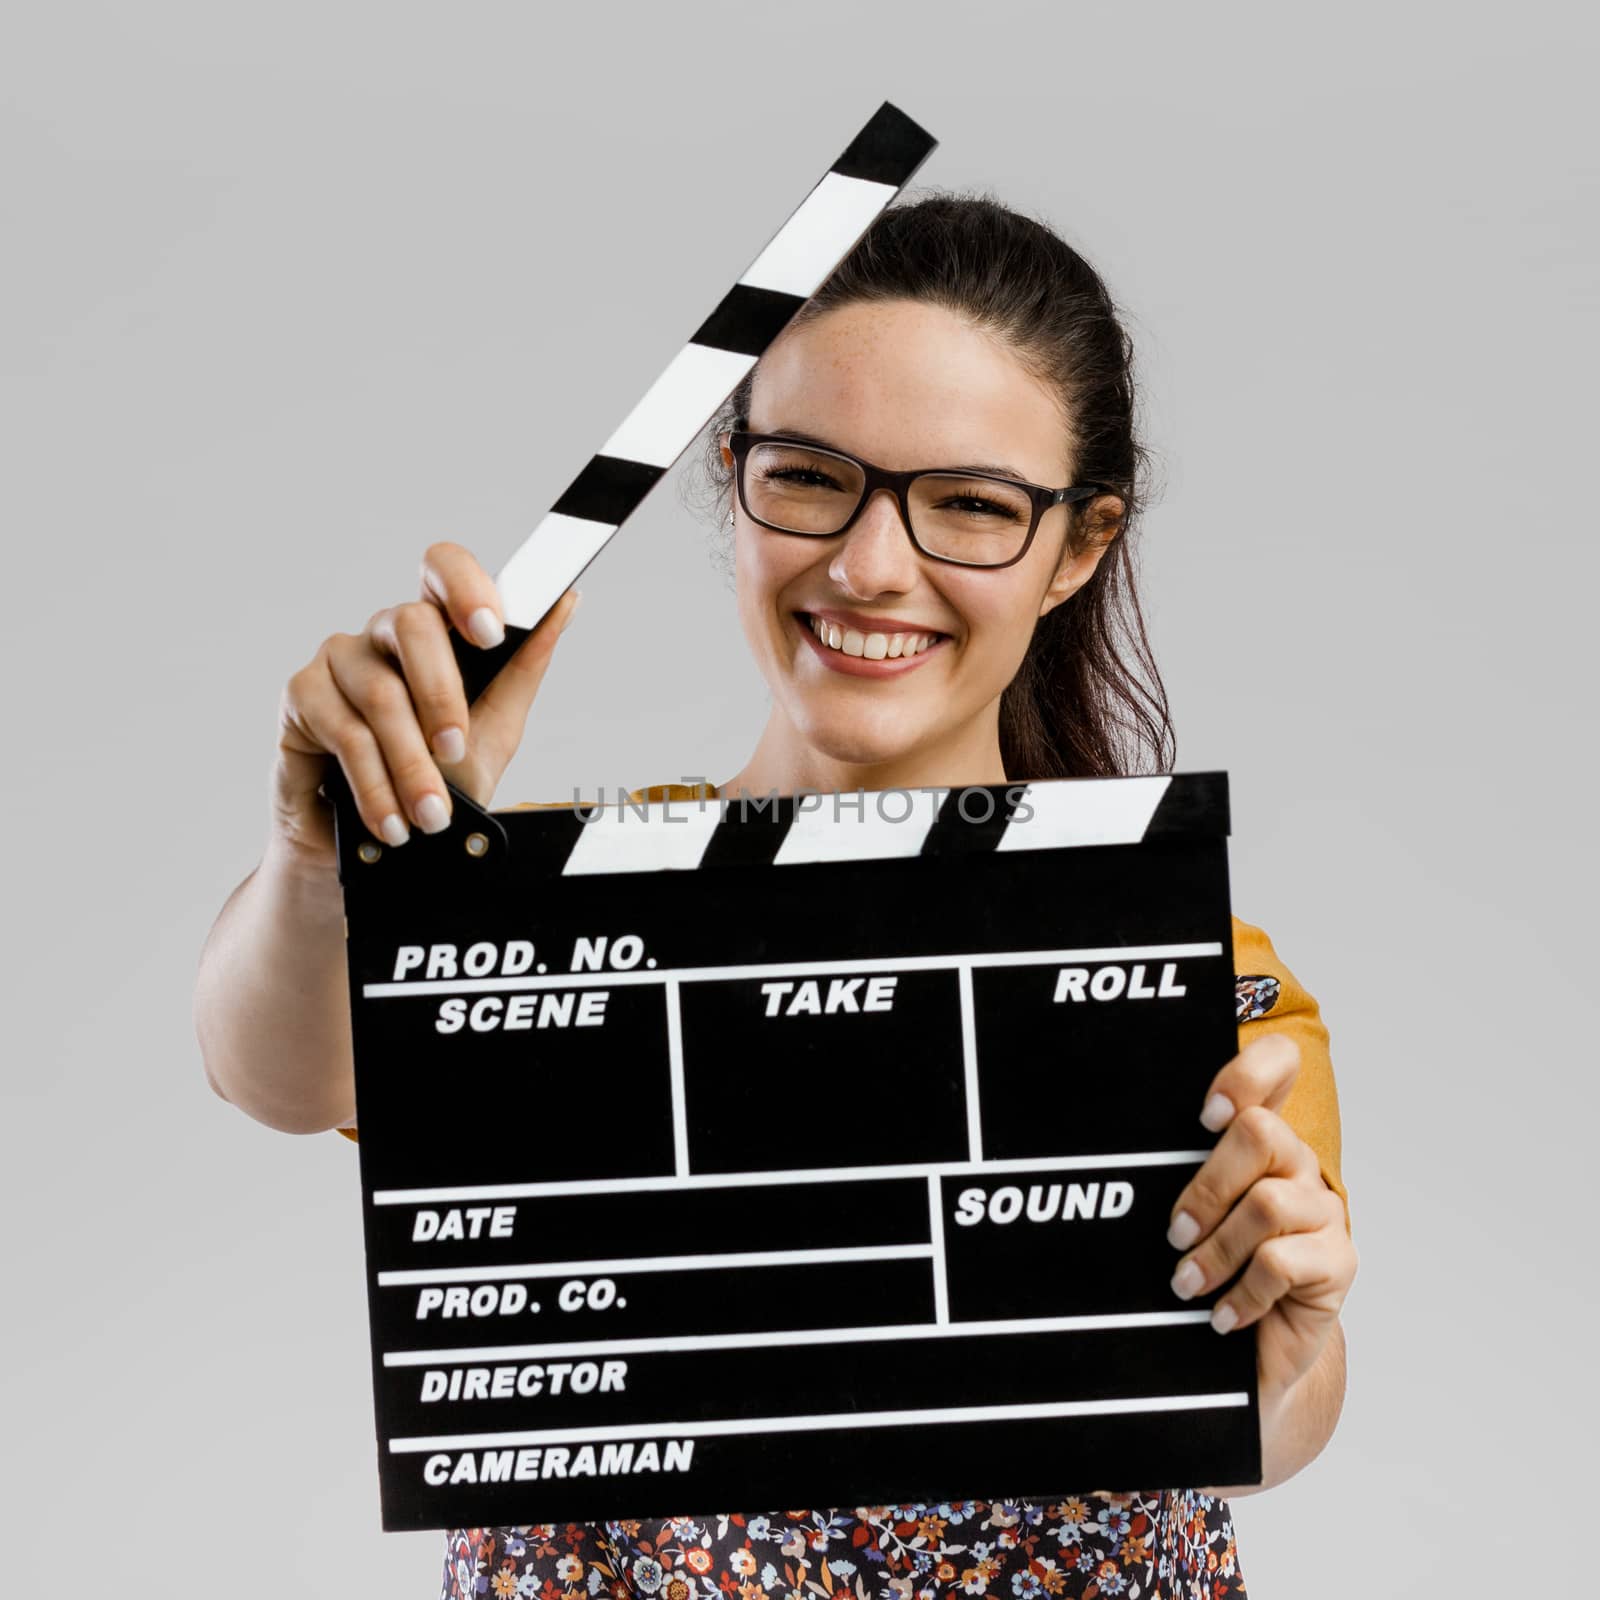 Portrait of beautilful woman holding a clapboard